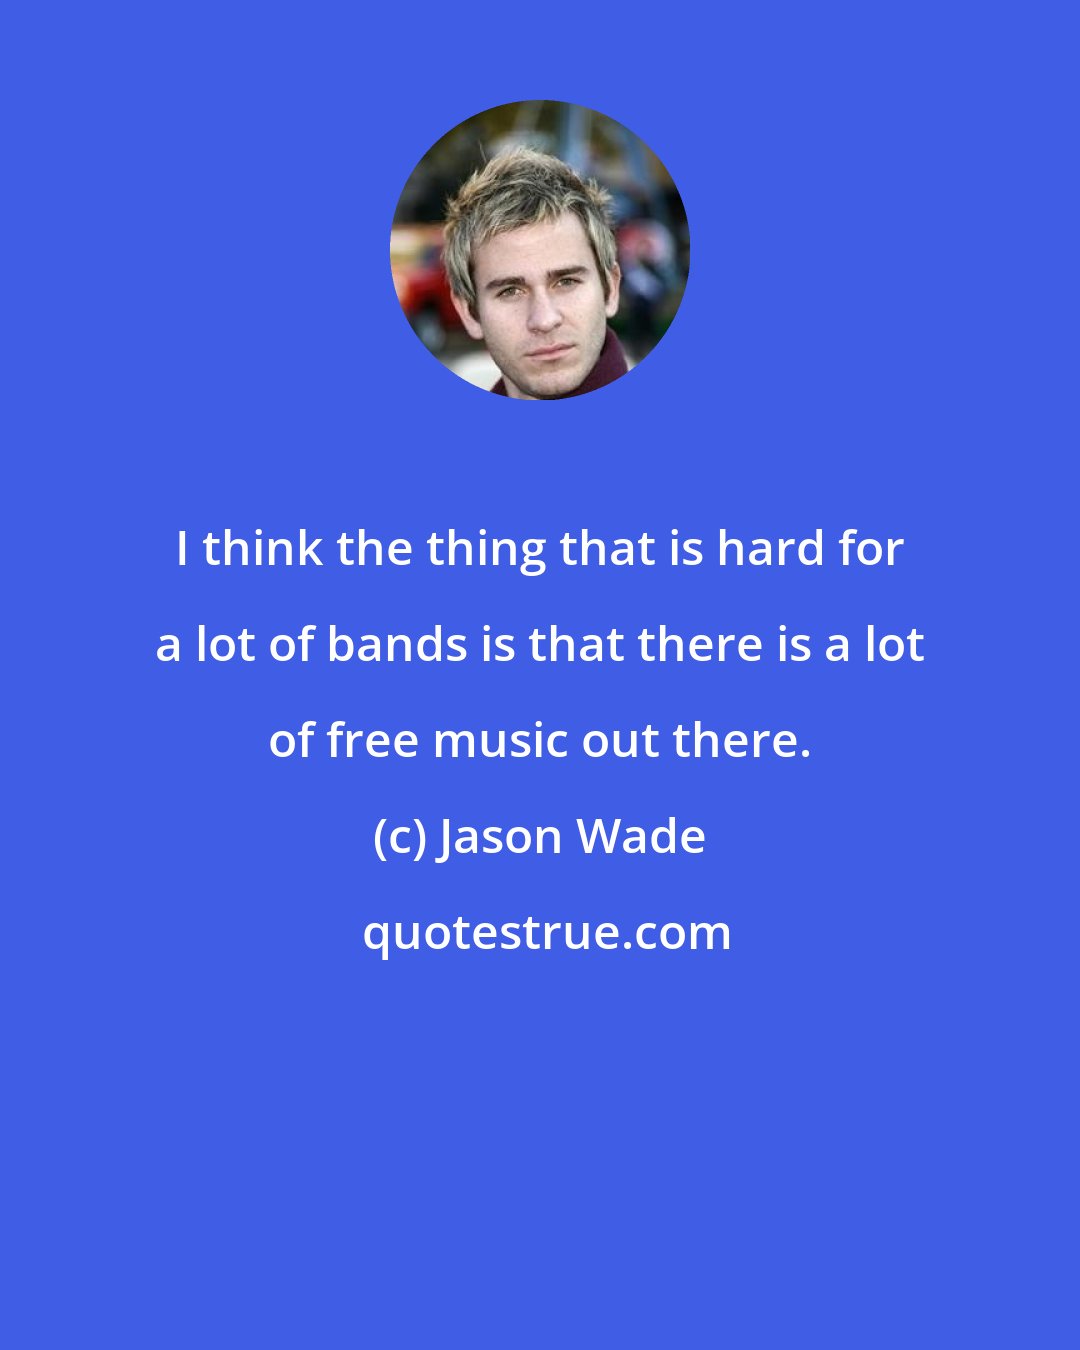 Jason Wade: I think the thing that is hard for a lot of bands is that there is a lot of free music out there.